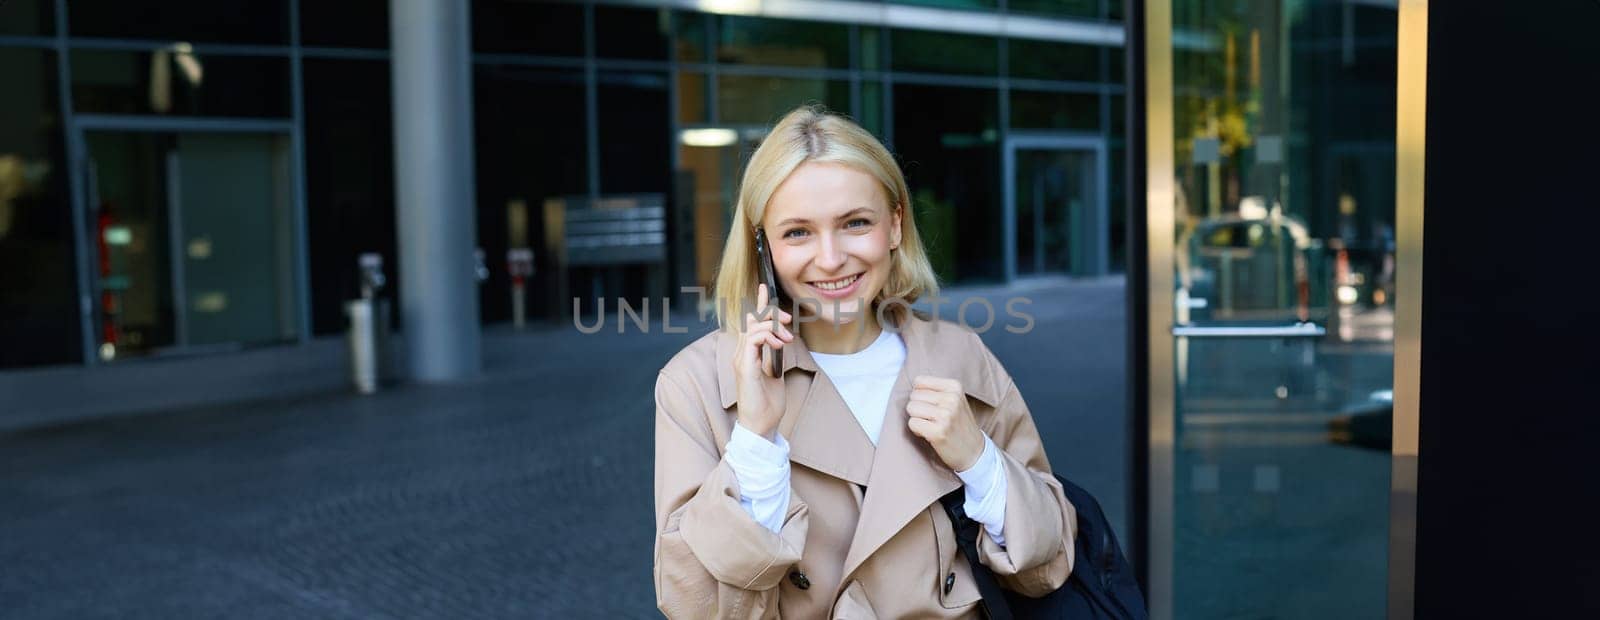 Close up portrait of young blond woman, walking on street and talking on mobile phone, chatting with friend on smartphone. Lifestyle and people concept